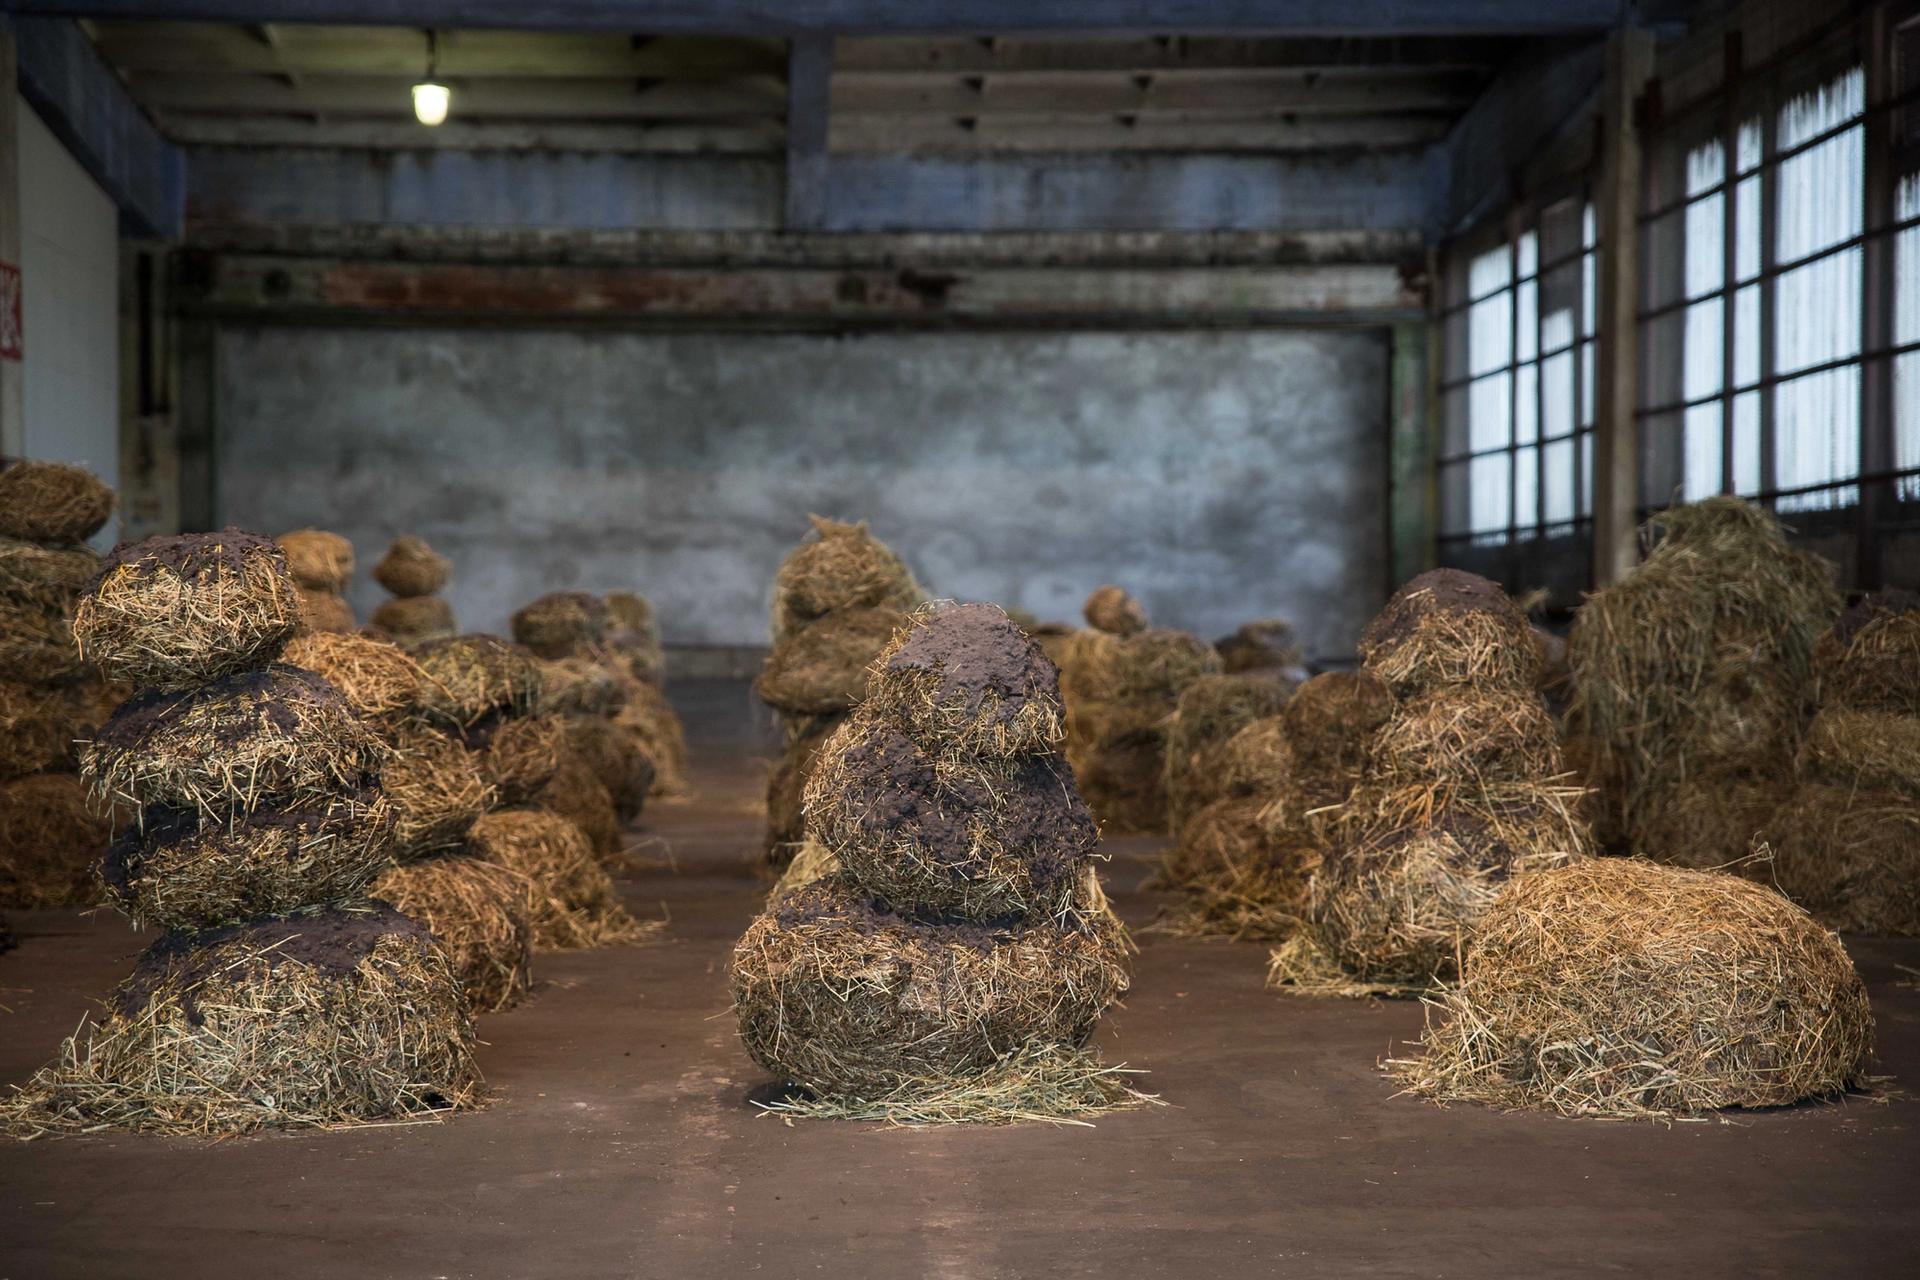 Augustus Serapinas's Mudmen (2020) will be part of Parcours, presented by Emalin © Courtesy of the Riga International Biennial of Contemporary Art